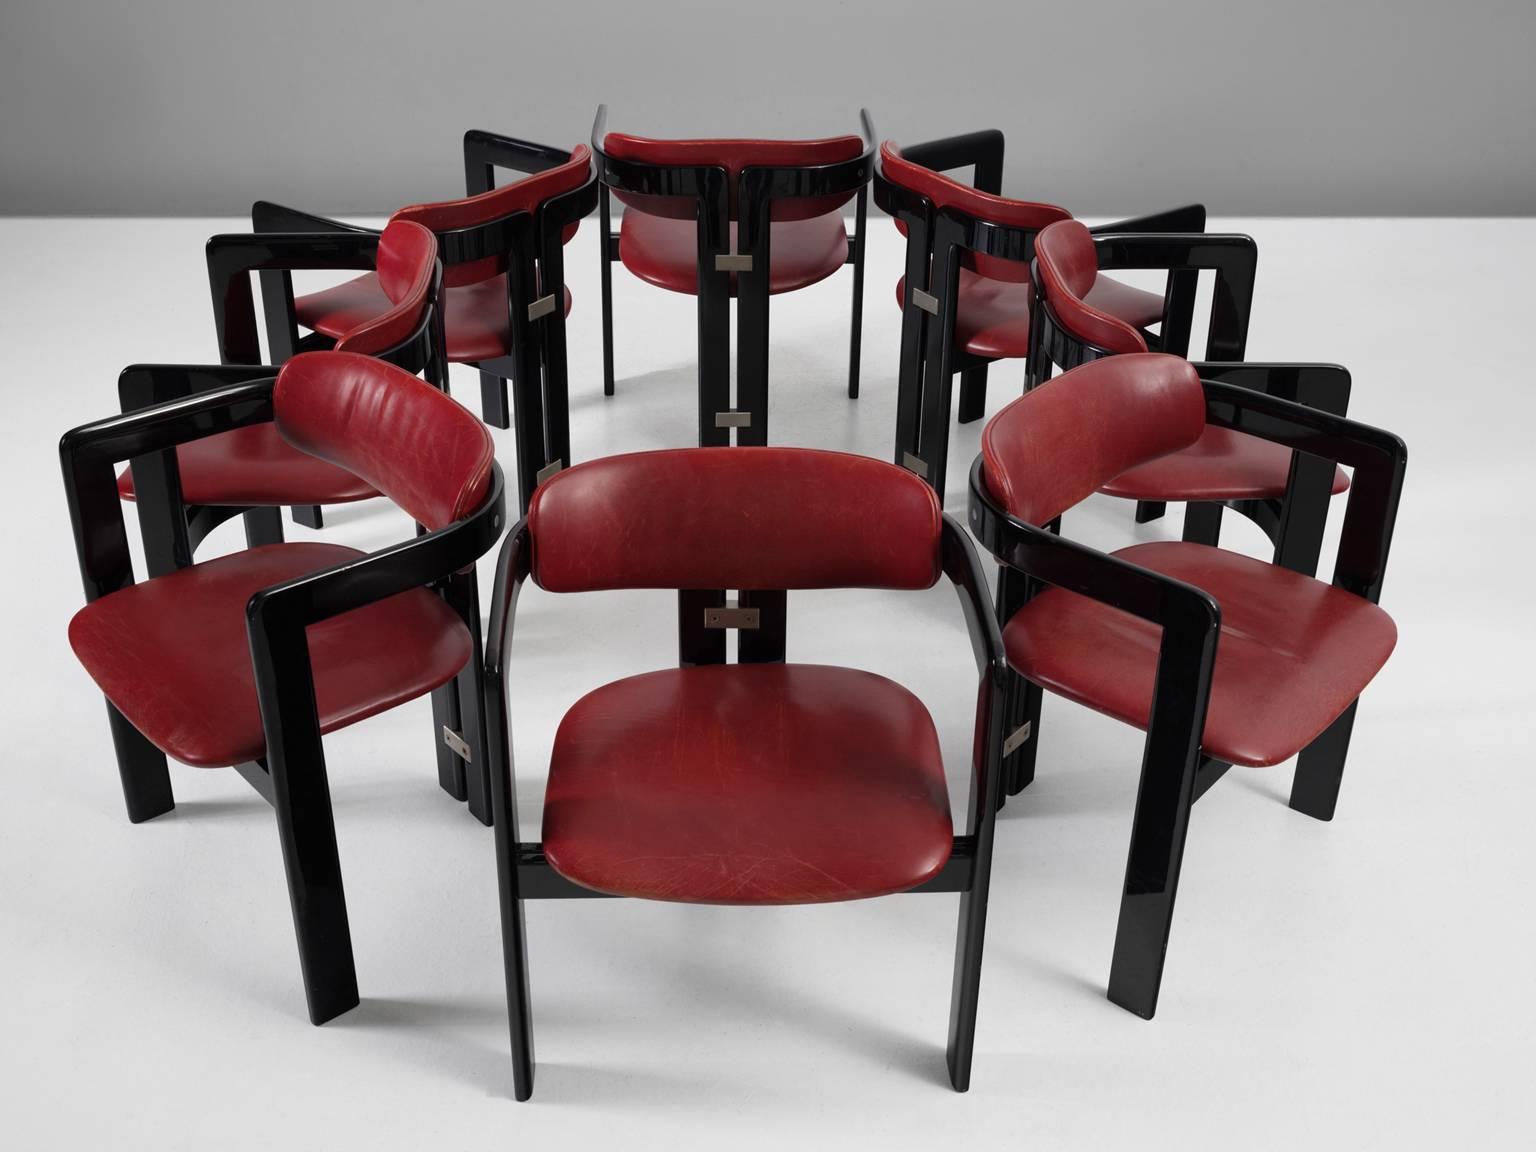 Set of eight 'Pamplona' dining room chairs, in wood and leather by Augusto Savini for Pozzi, Italy, 1965. 

Set of eight armchairs in high gloss black lacquered wood and red leather upholstery. A characteristic design; simplistic yet very strong